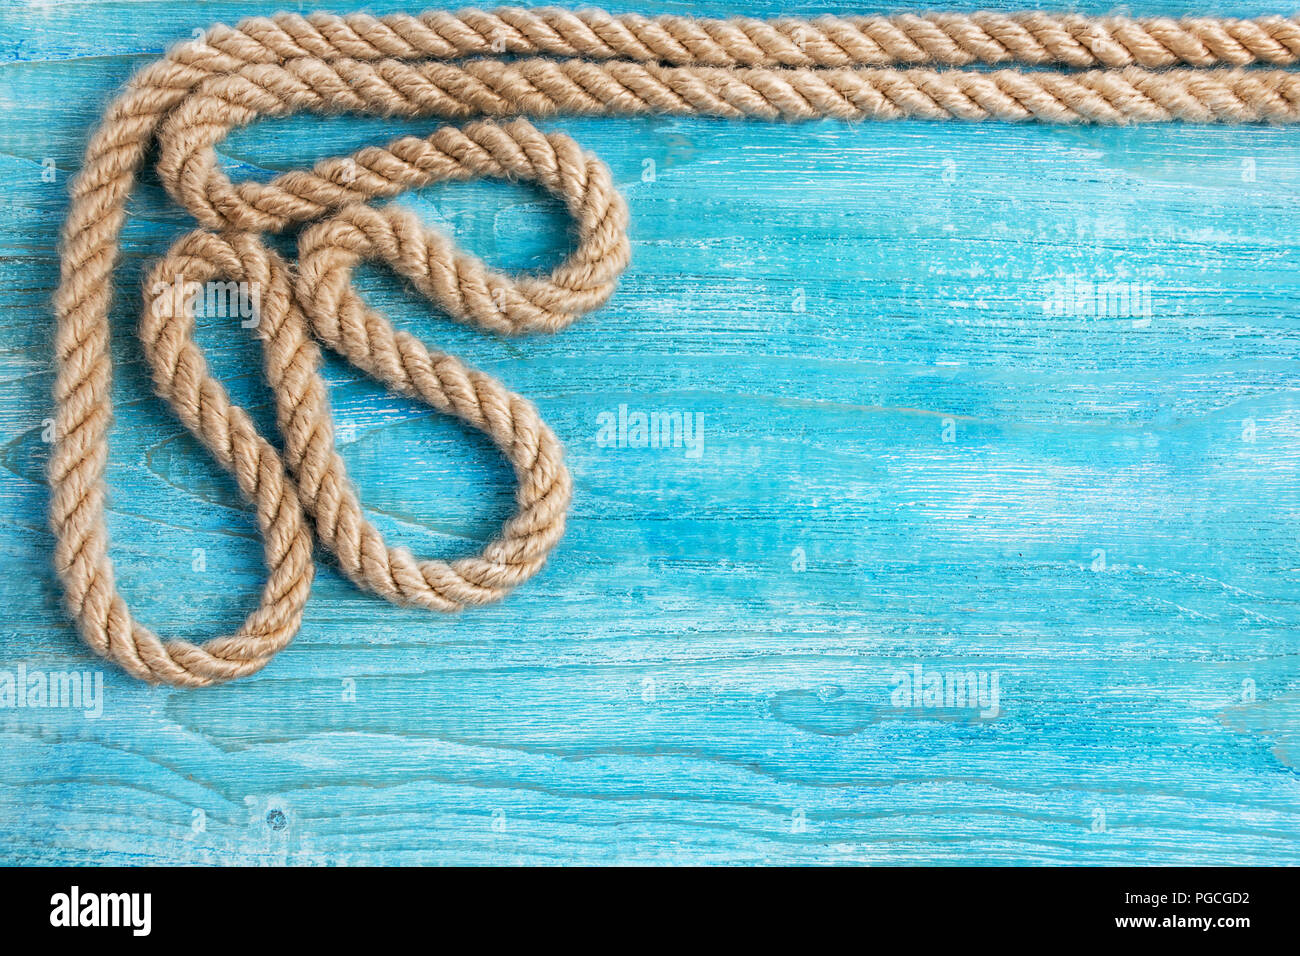 Rope and wooden background Stock Photo